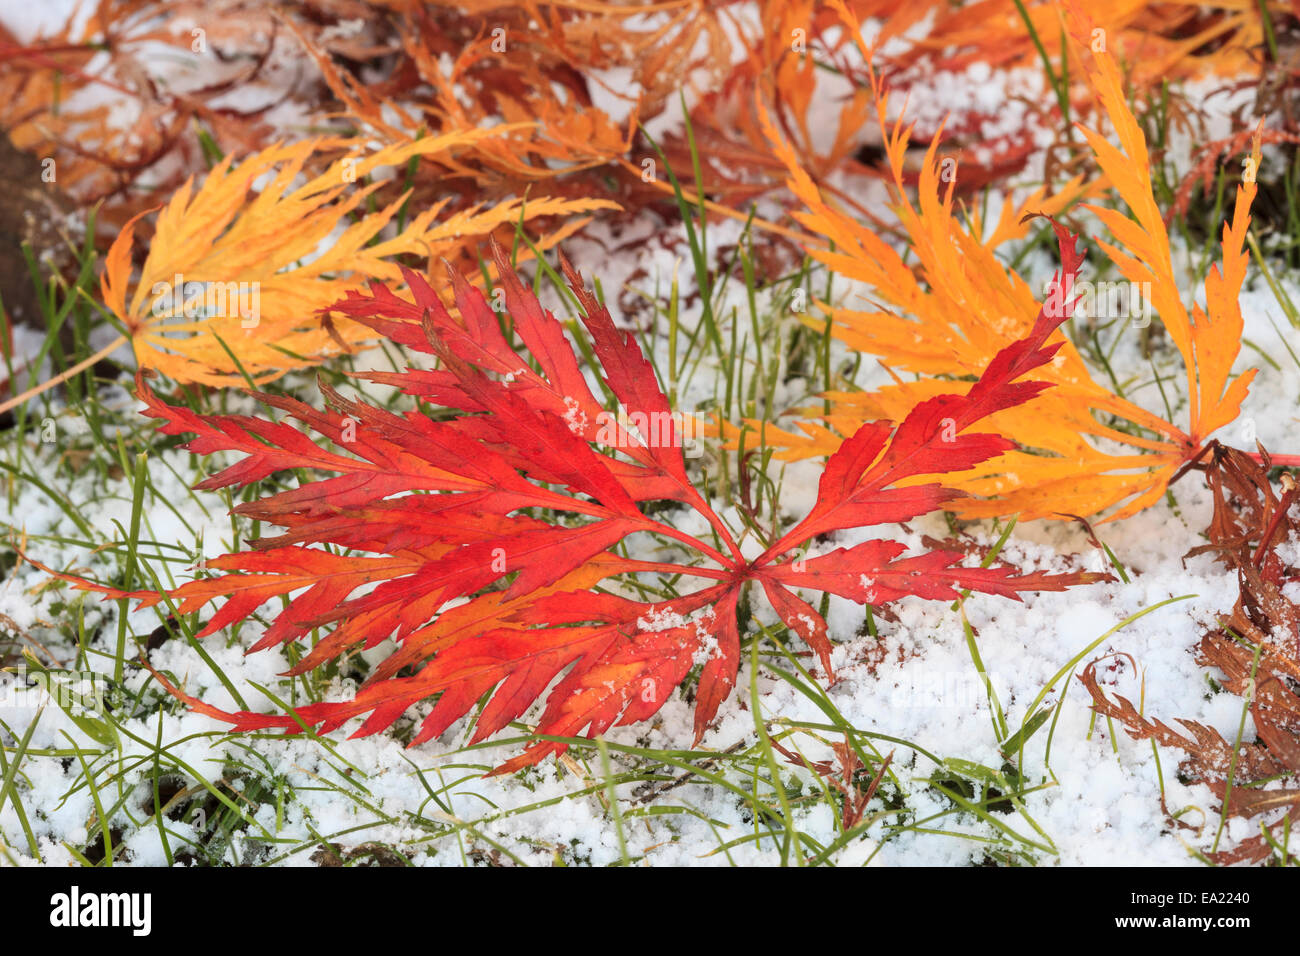 Colourful fallen Maple leaves of Acer palmatum lying on snow on the ground in late autumn. UK, Britain Stock Photo